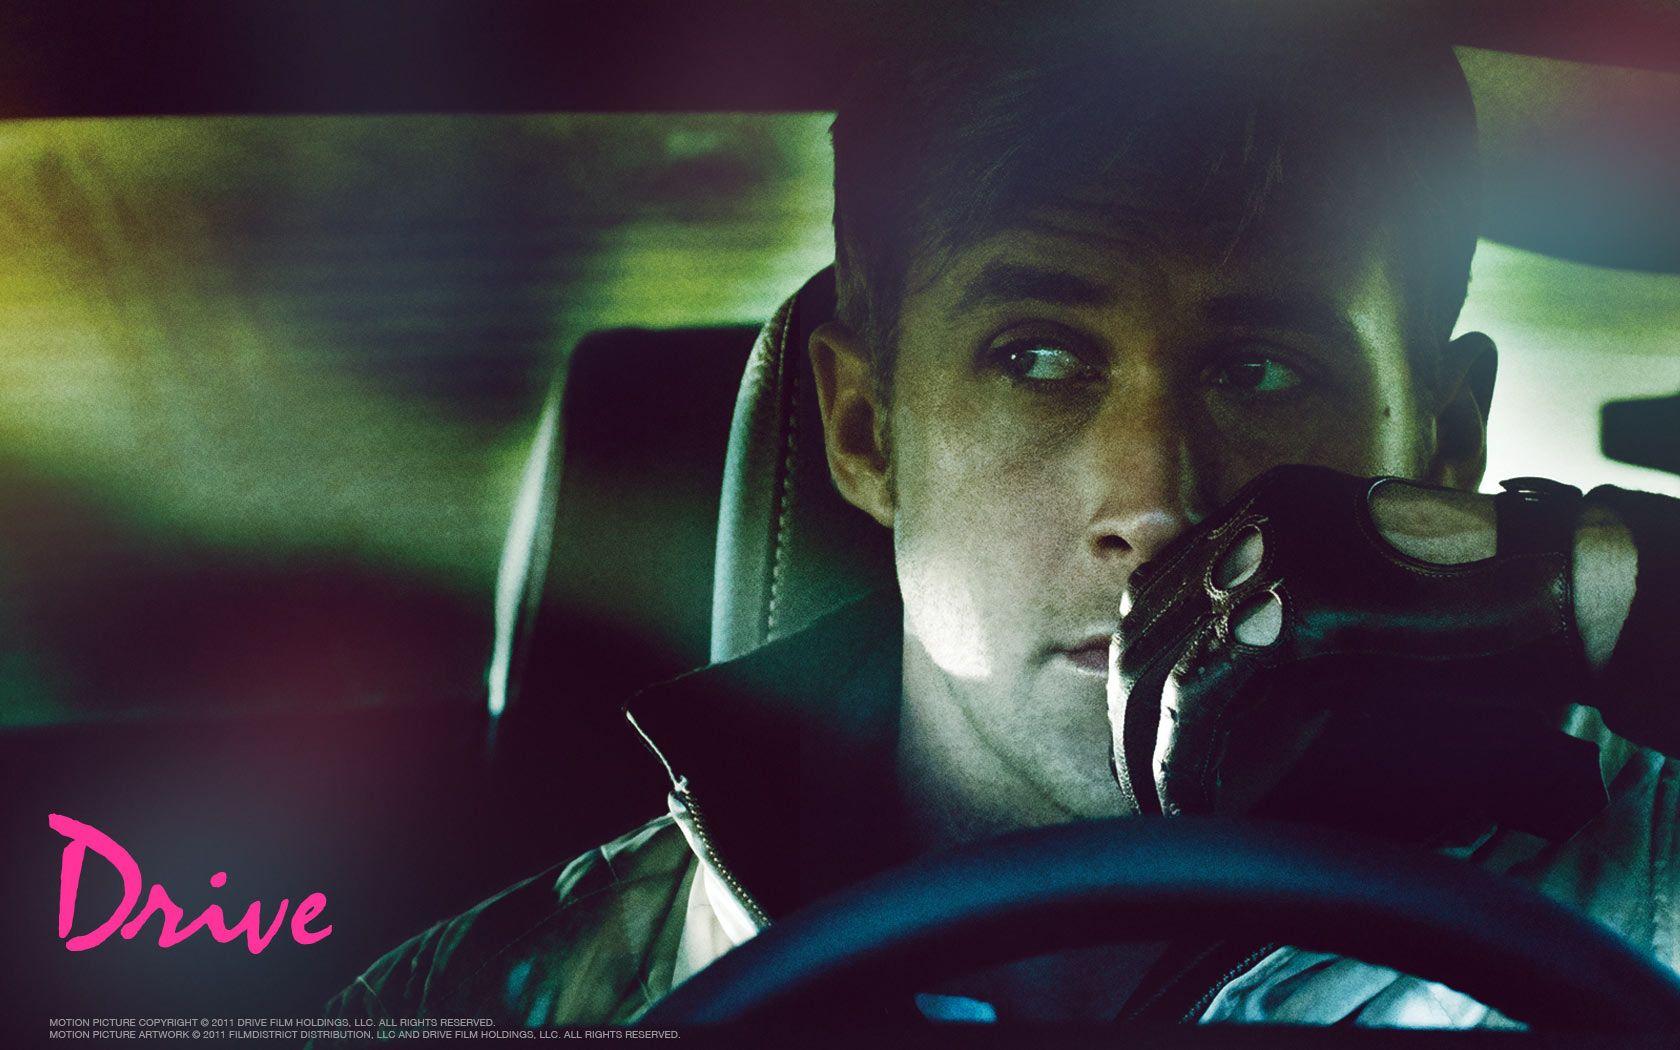 Drive” Finally Brings Realism To the Action Movie. Ryan gosling